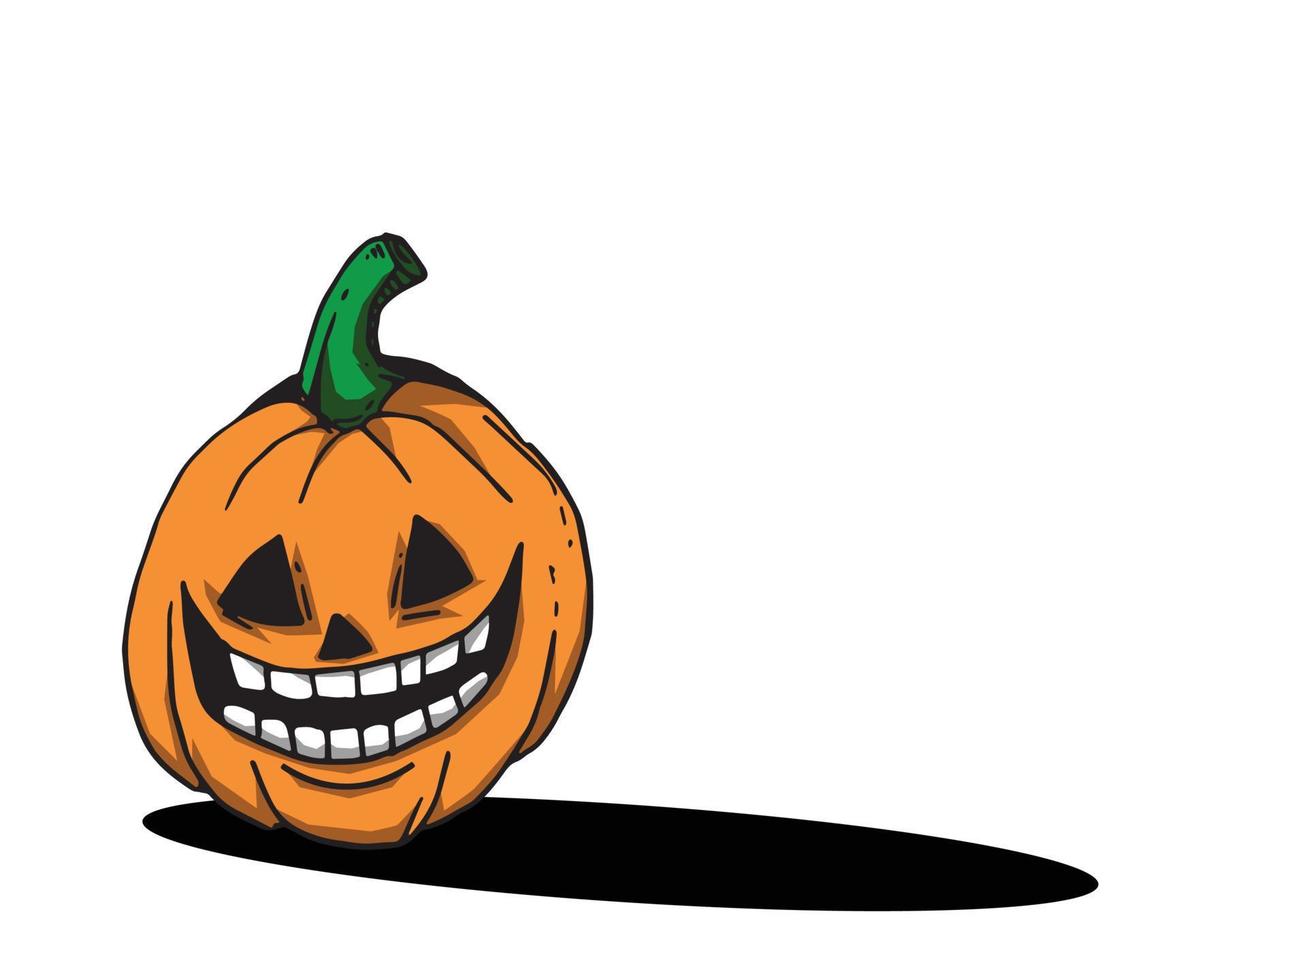 Creepy smilinag pumpkin. Background with copy space area that suitable for poster, banner, sticker, etc vector